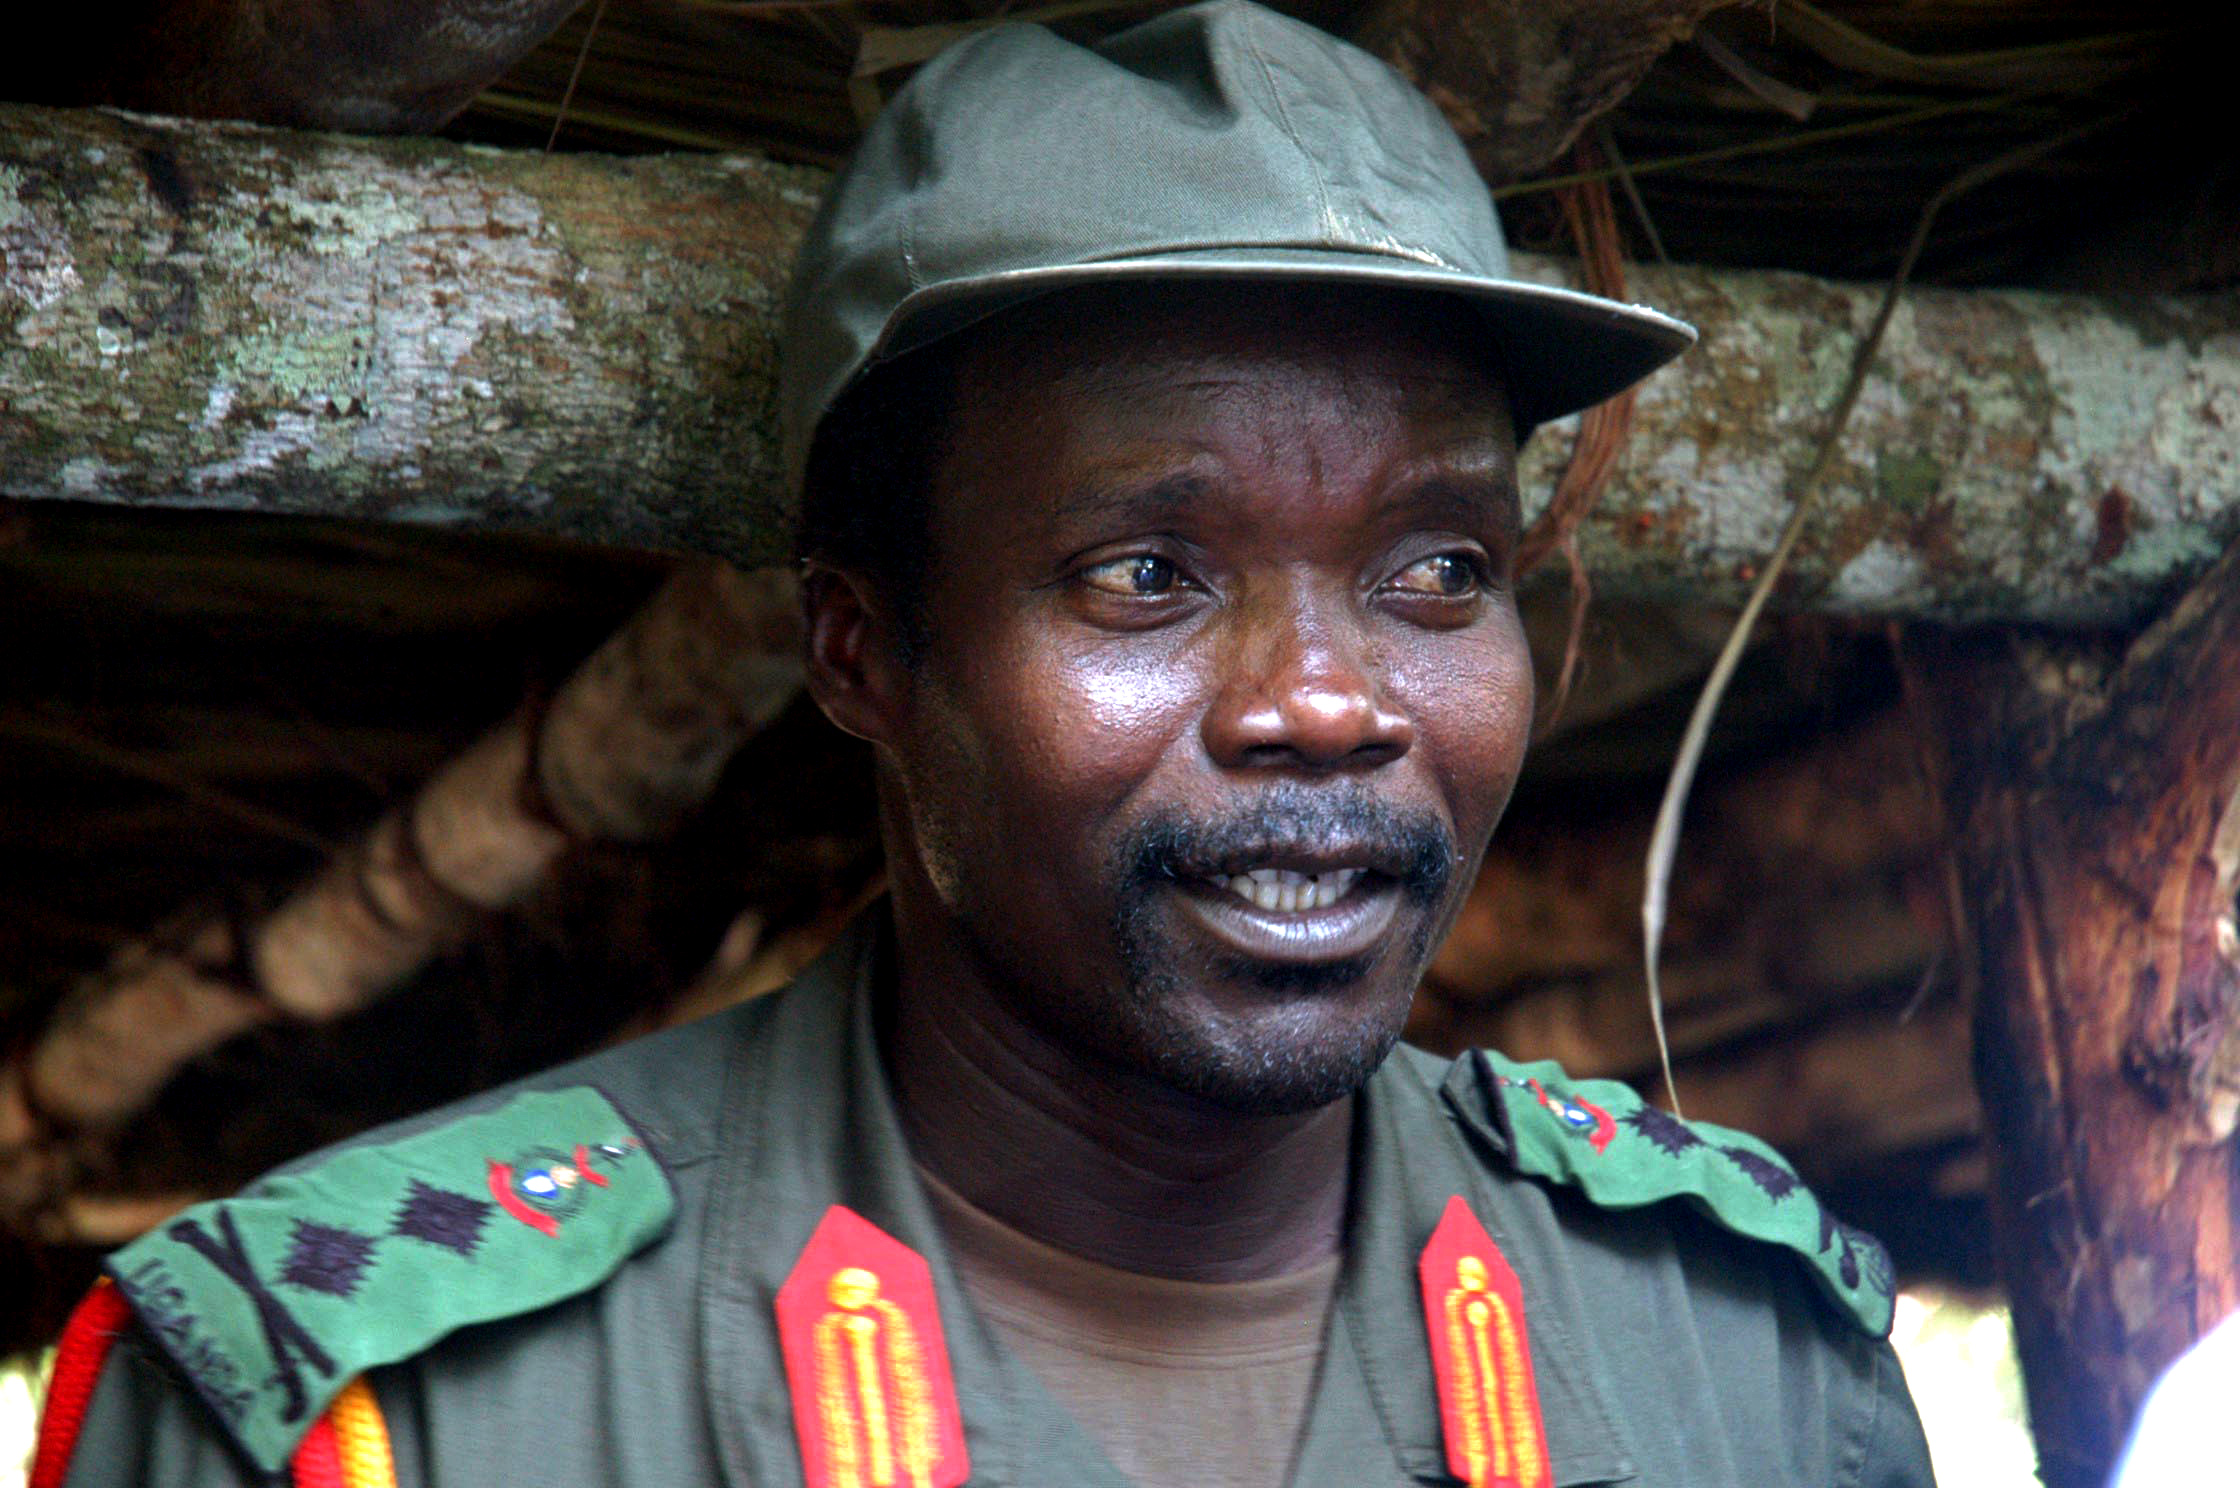 Foreign Policy Op-ed: Get Kony